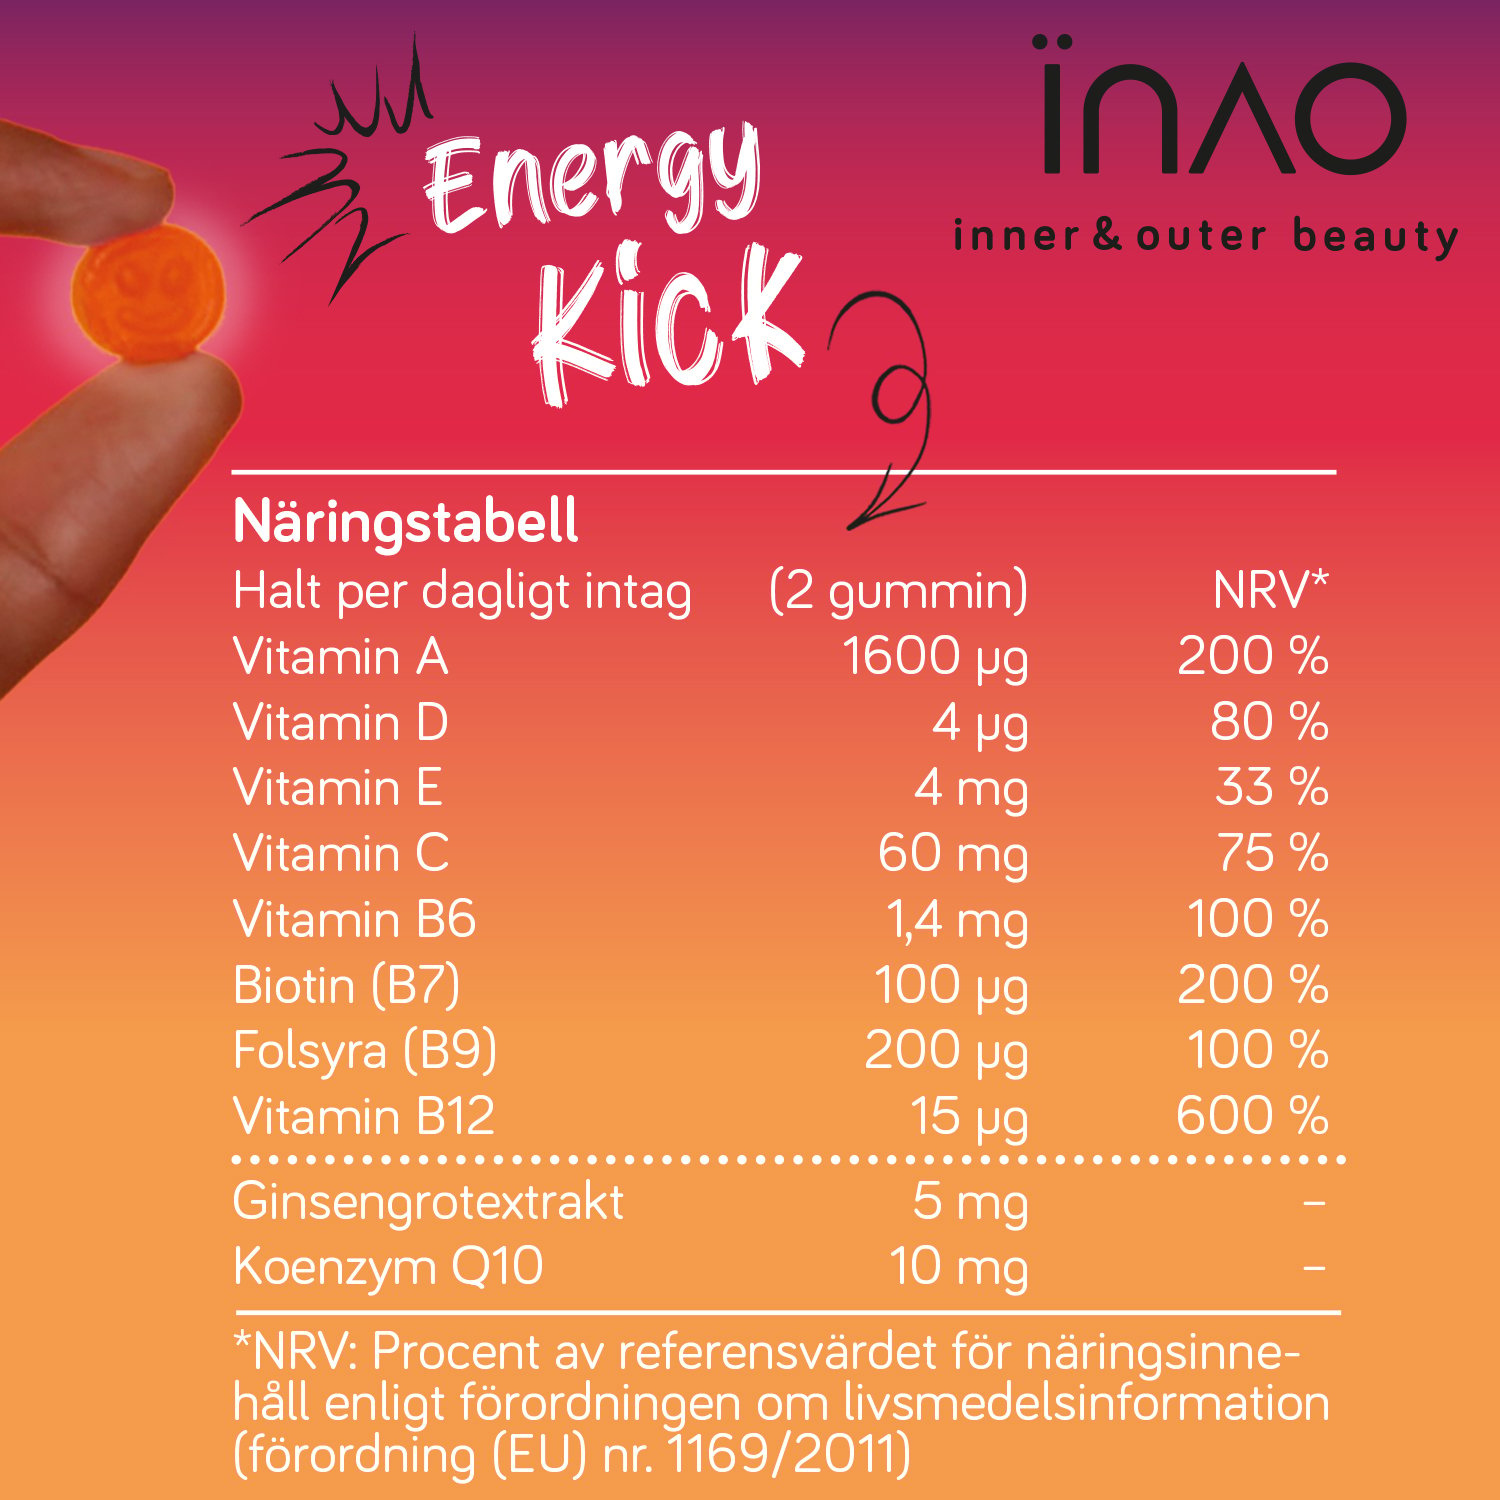 INAO Inner & Outer Beauty Energy by essence Energy Kick 60 tuggtabletter